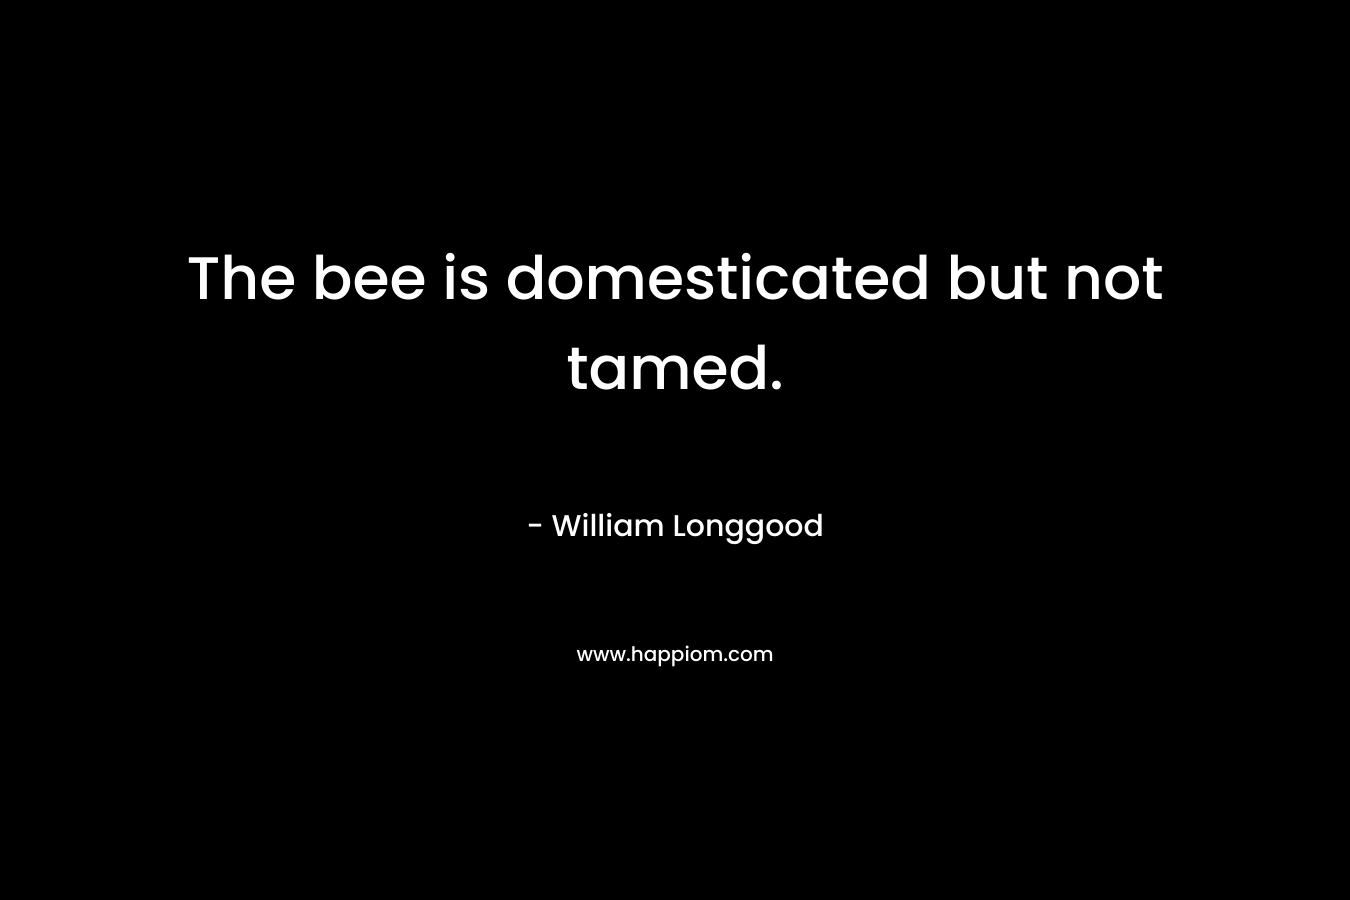 The bee is domesticated but not tamed.